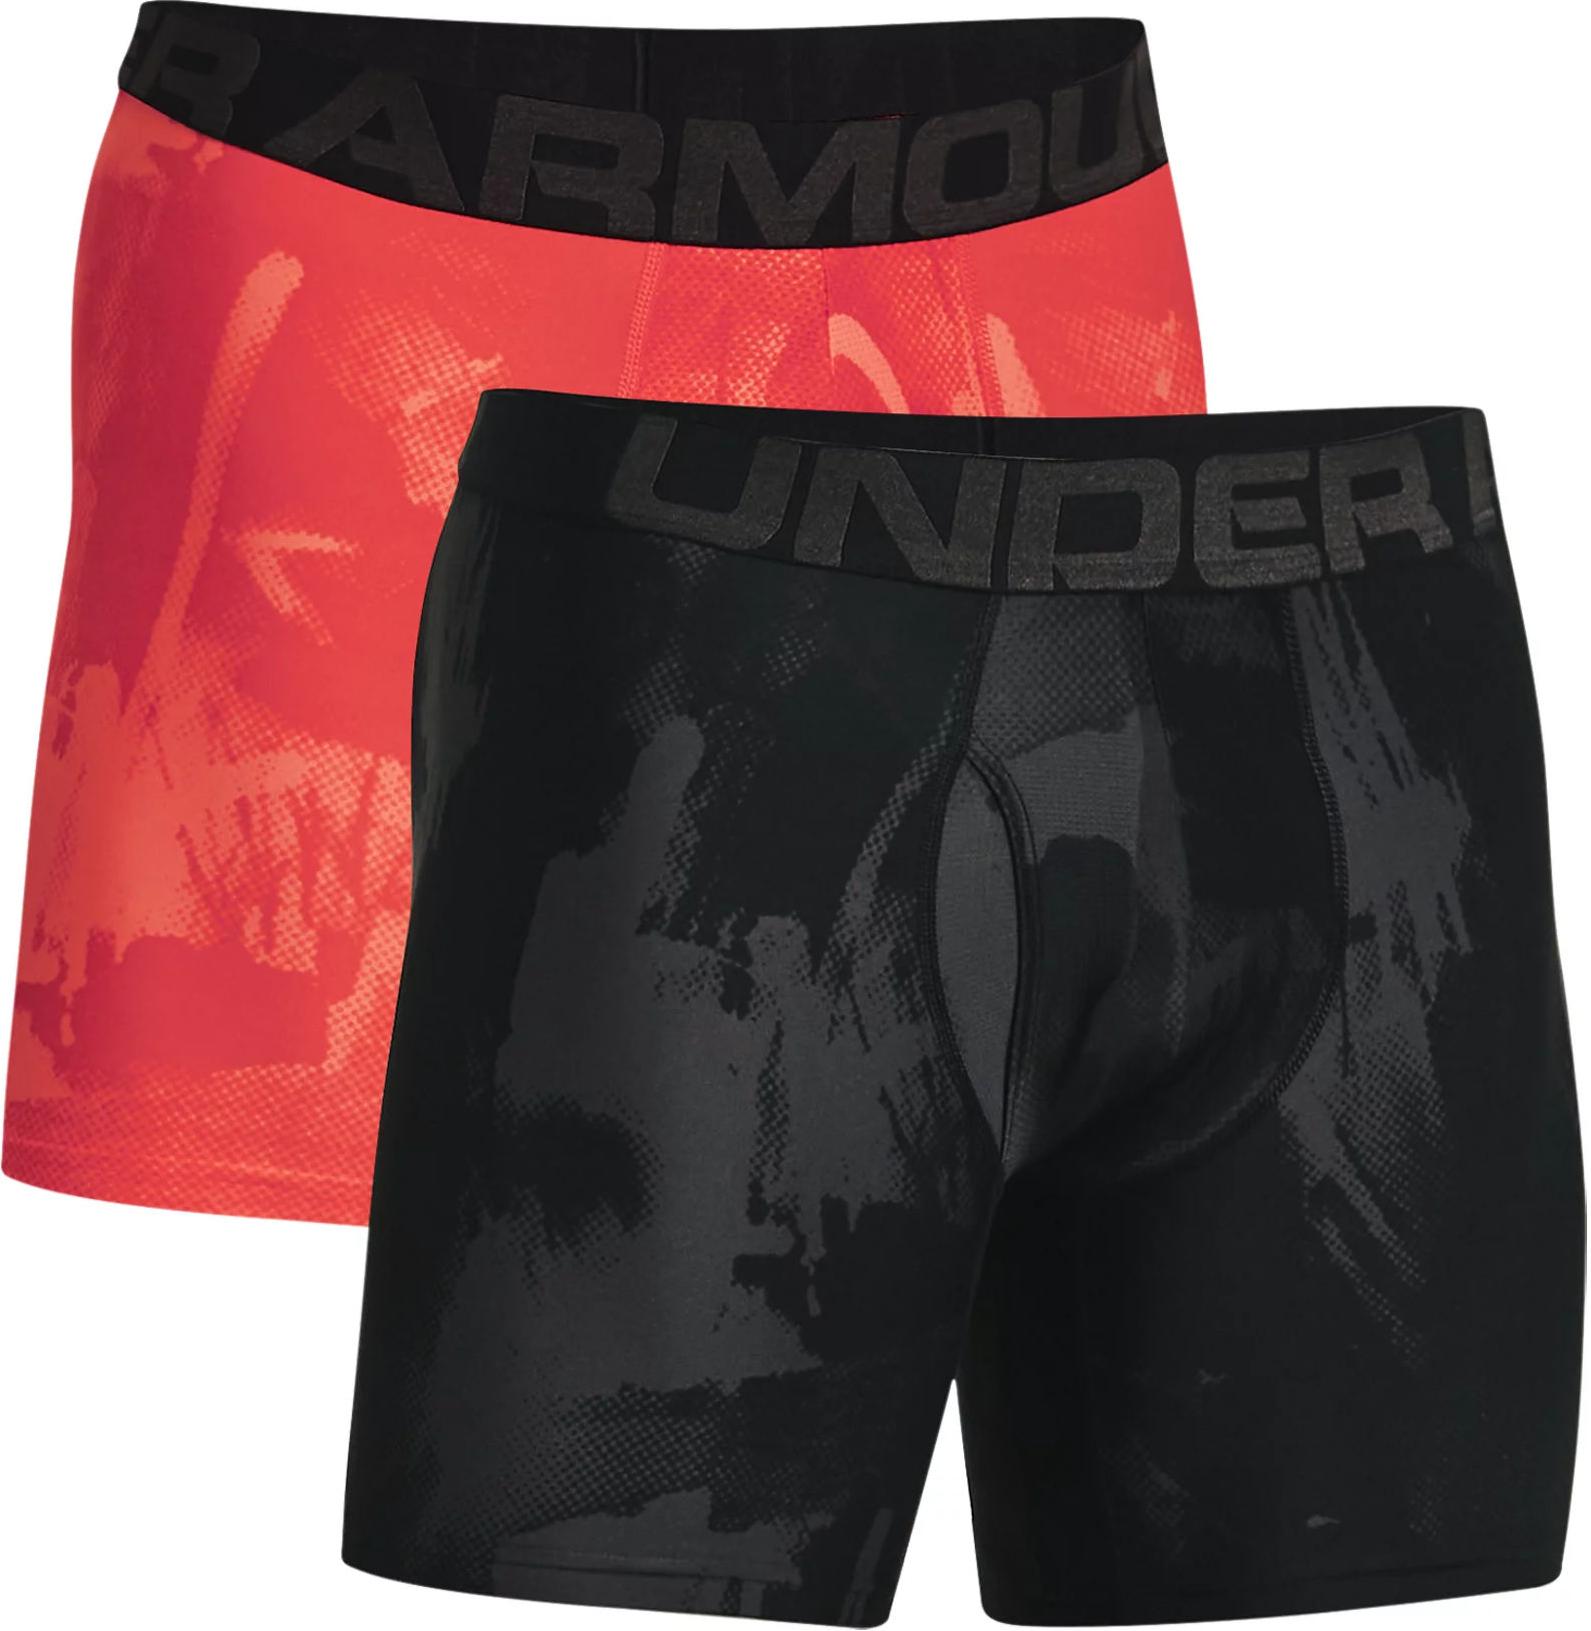 Boxer shorts Under Armour UA Tech 6in Novelty 2 Pack